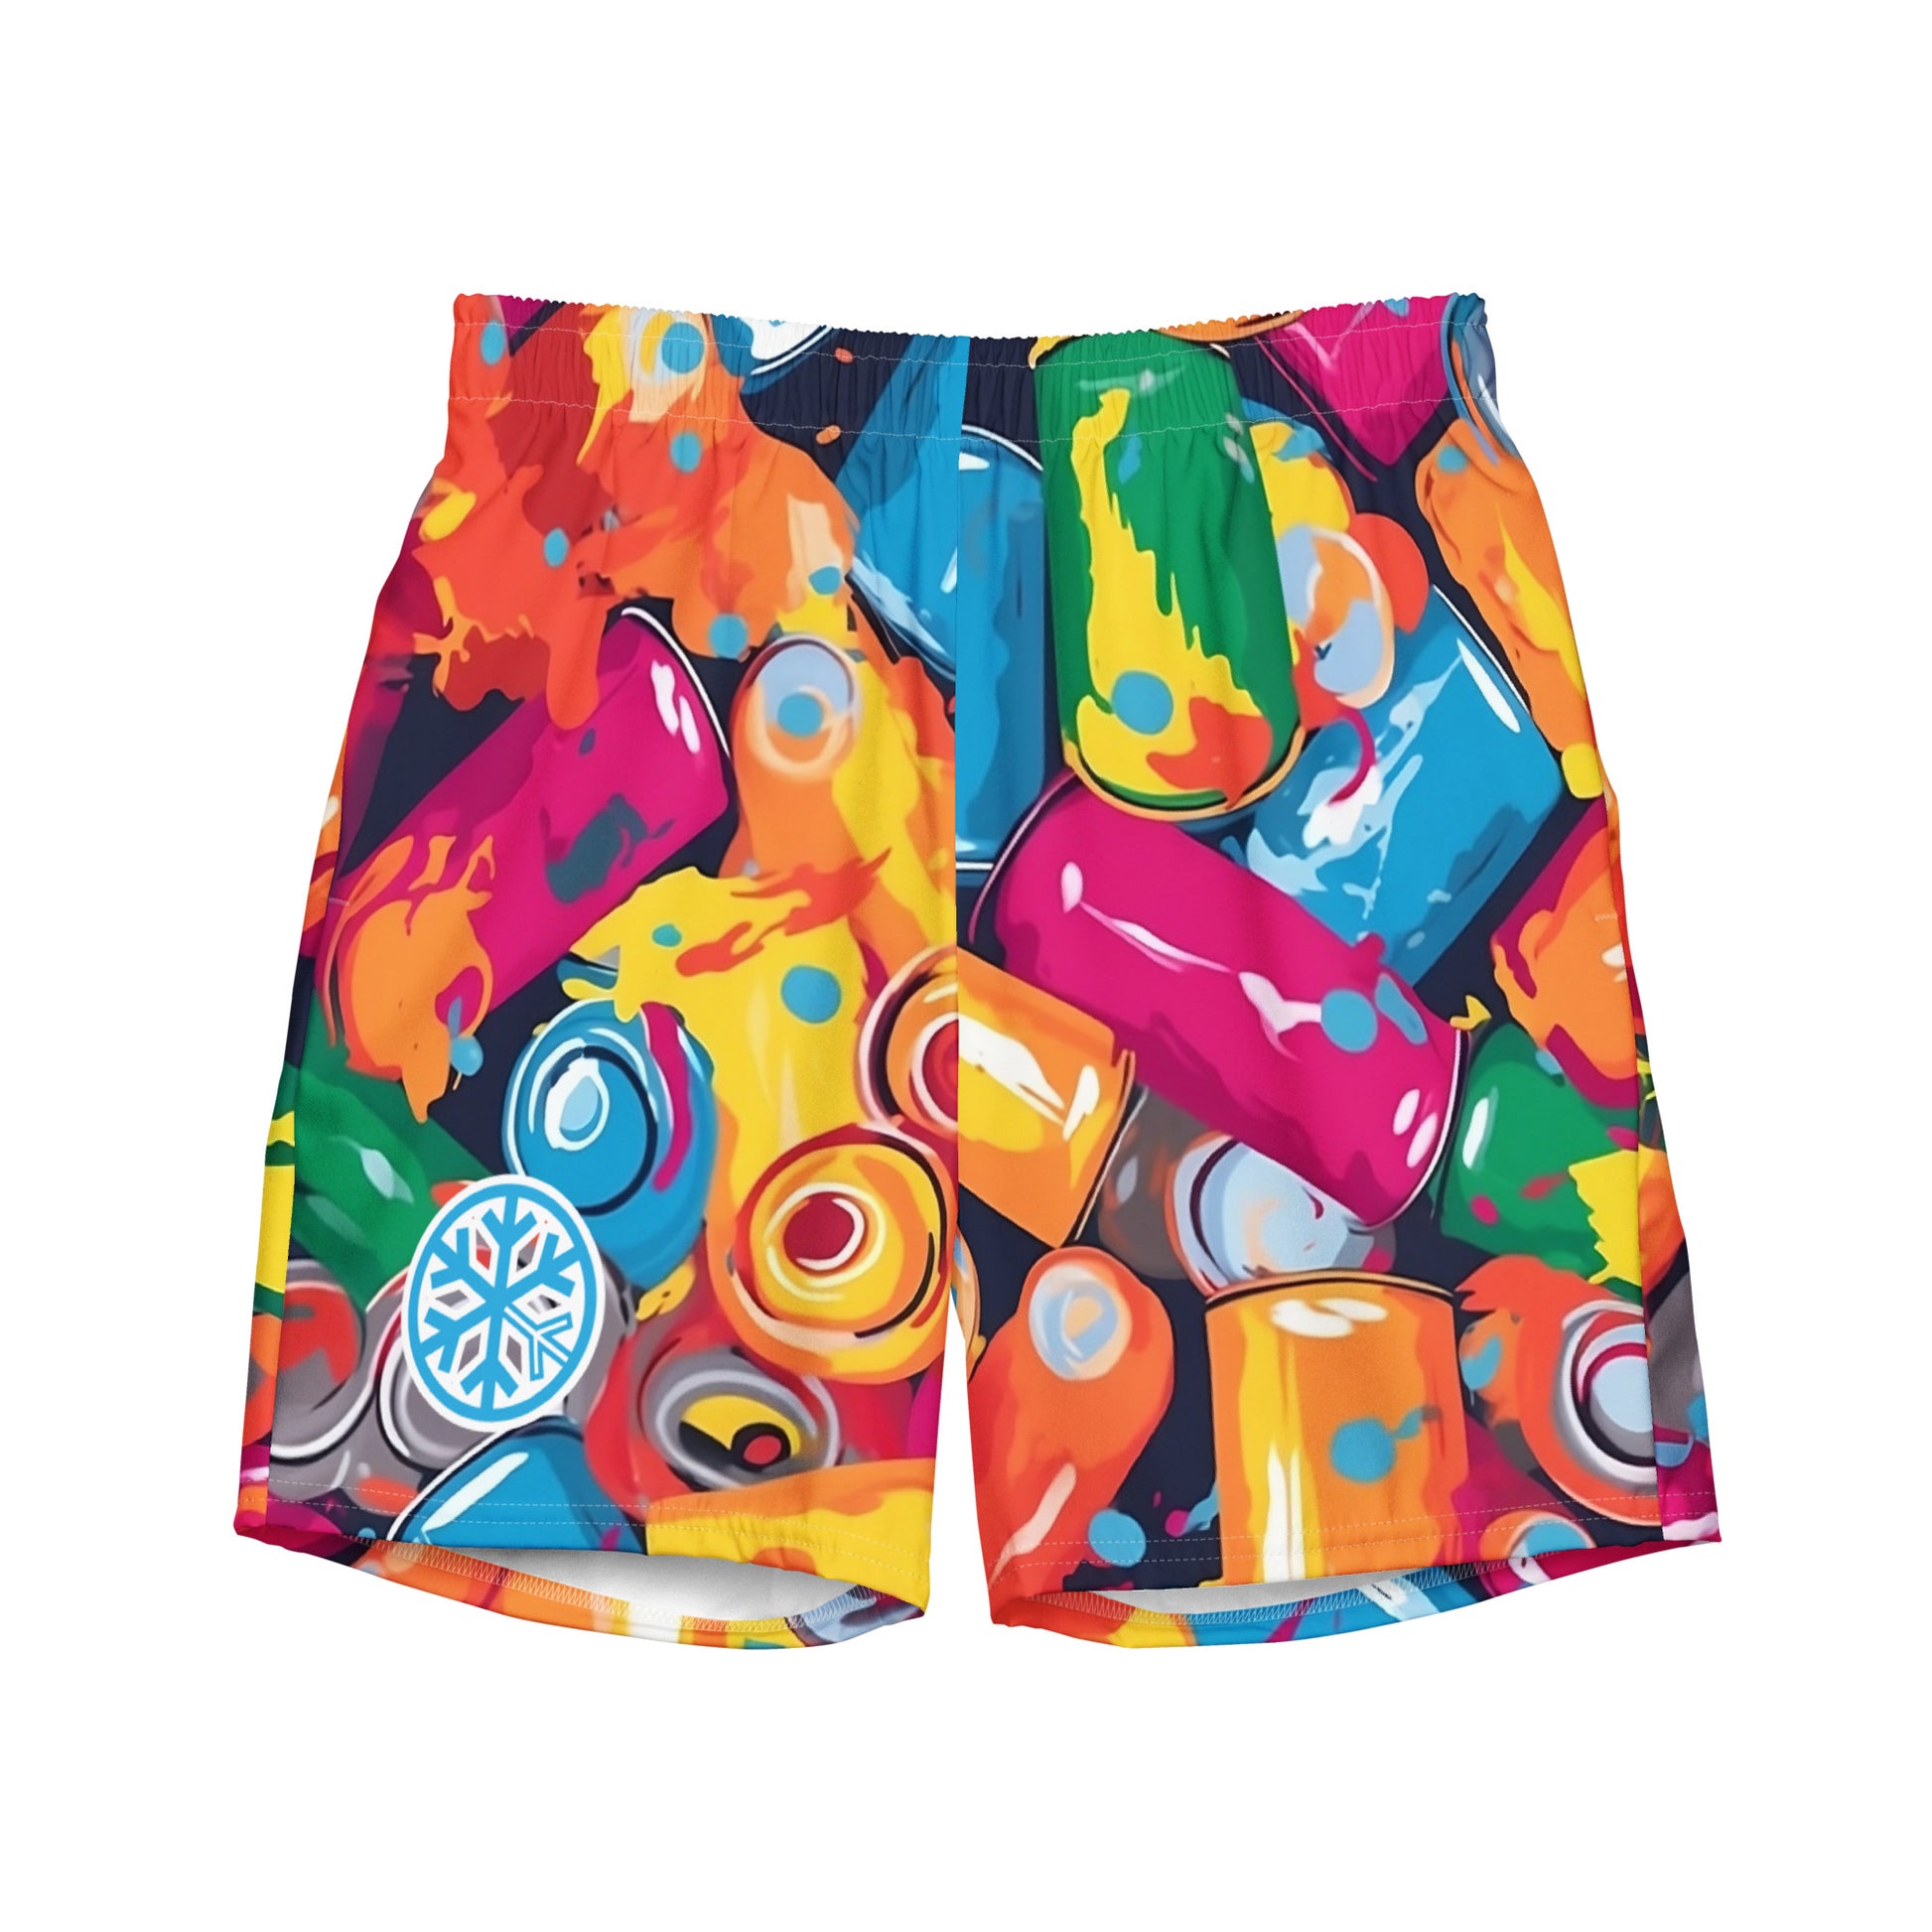 spray cans swim shorts by B.Different Clothing independent streetwear inspired by street art graffiti